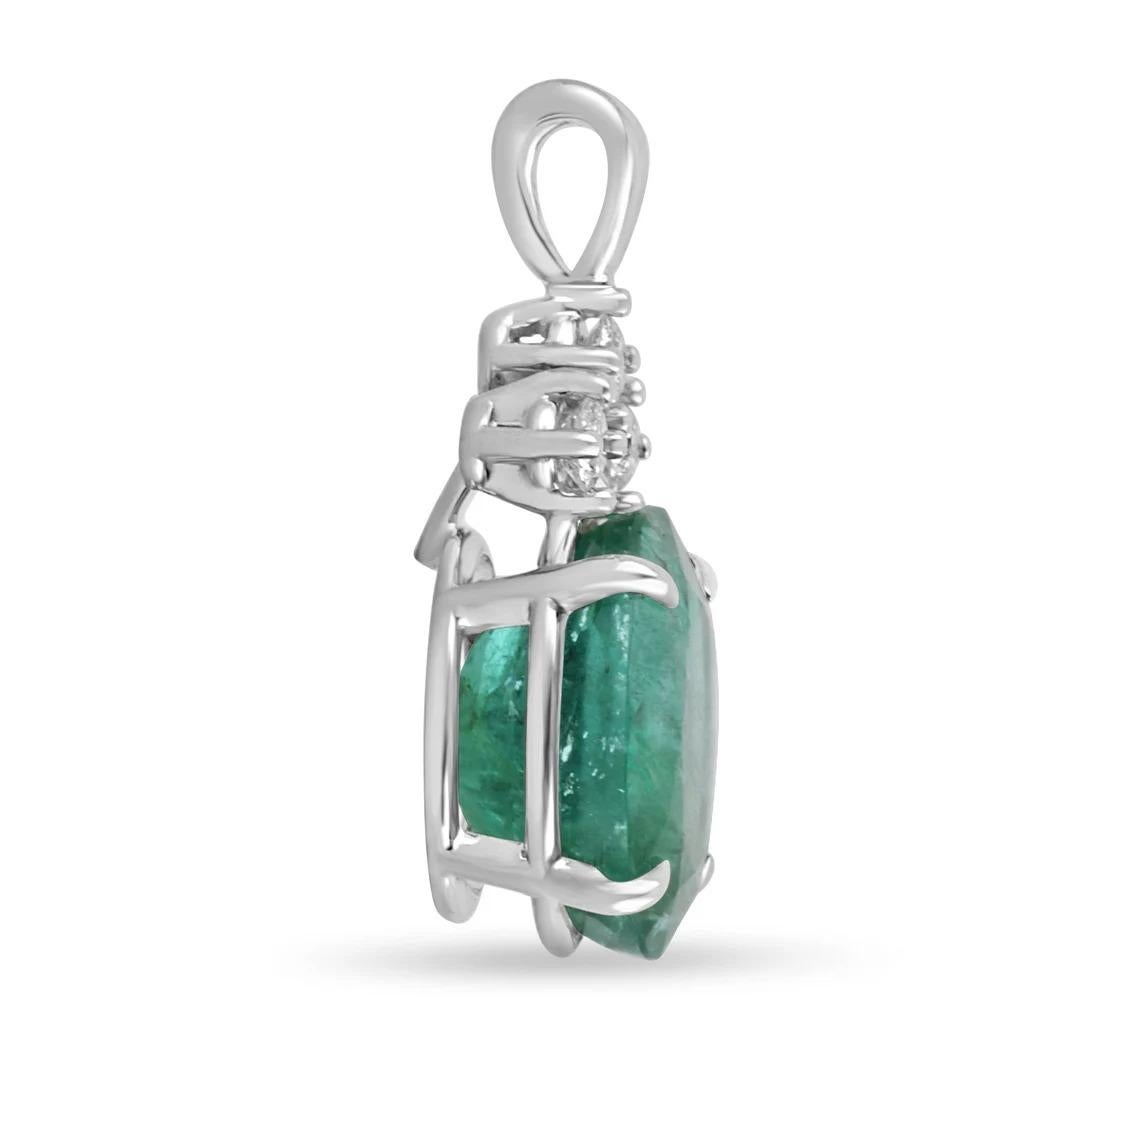 Featured here is a stunning oval emerald & diamond accent necklace in fine 14k white gold. Displayed in the center is a deep green emerald accented by a simple four-prong gold mount, allowing for the emerald to be shown in full view. Diamonds accent